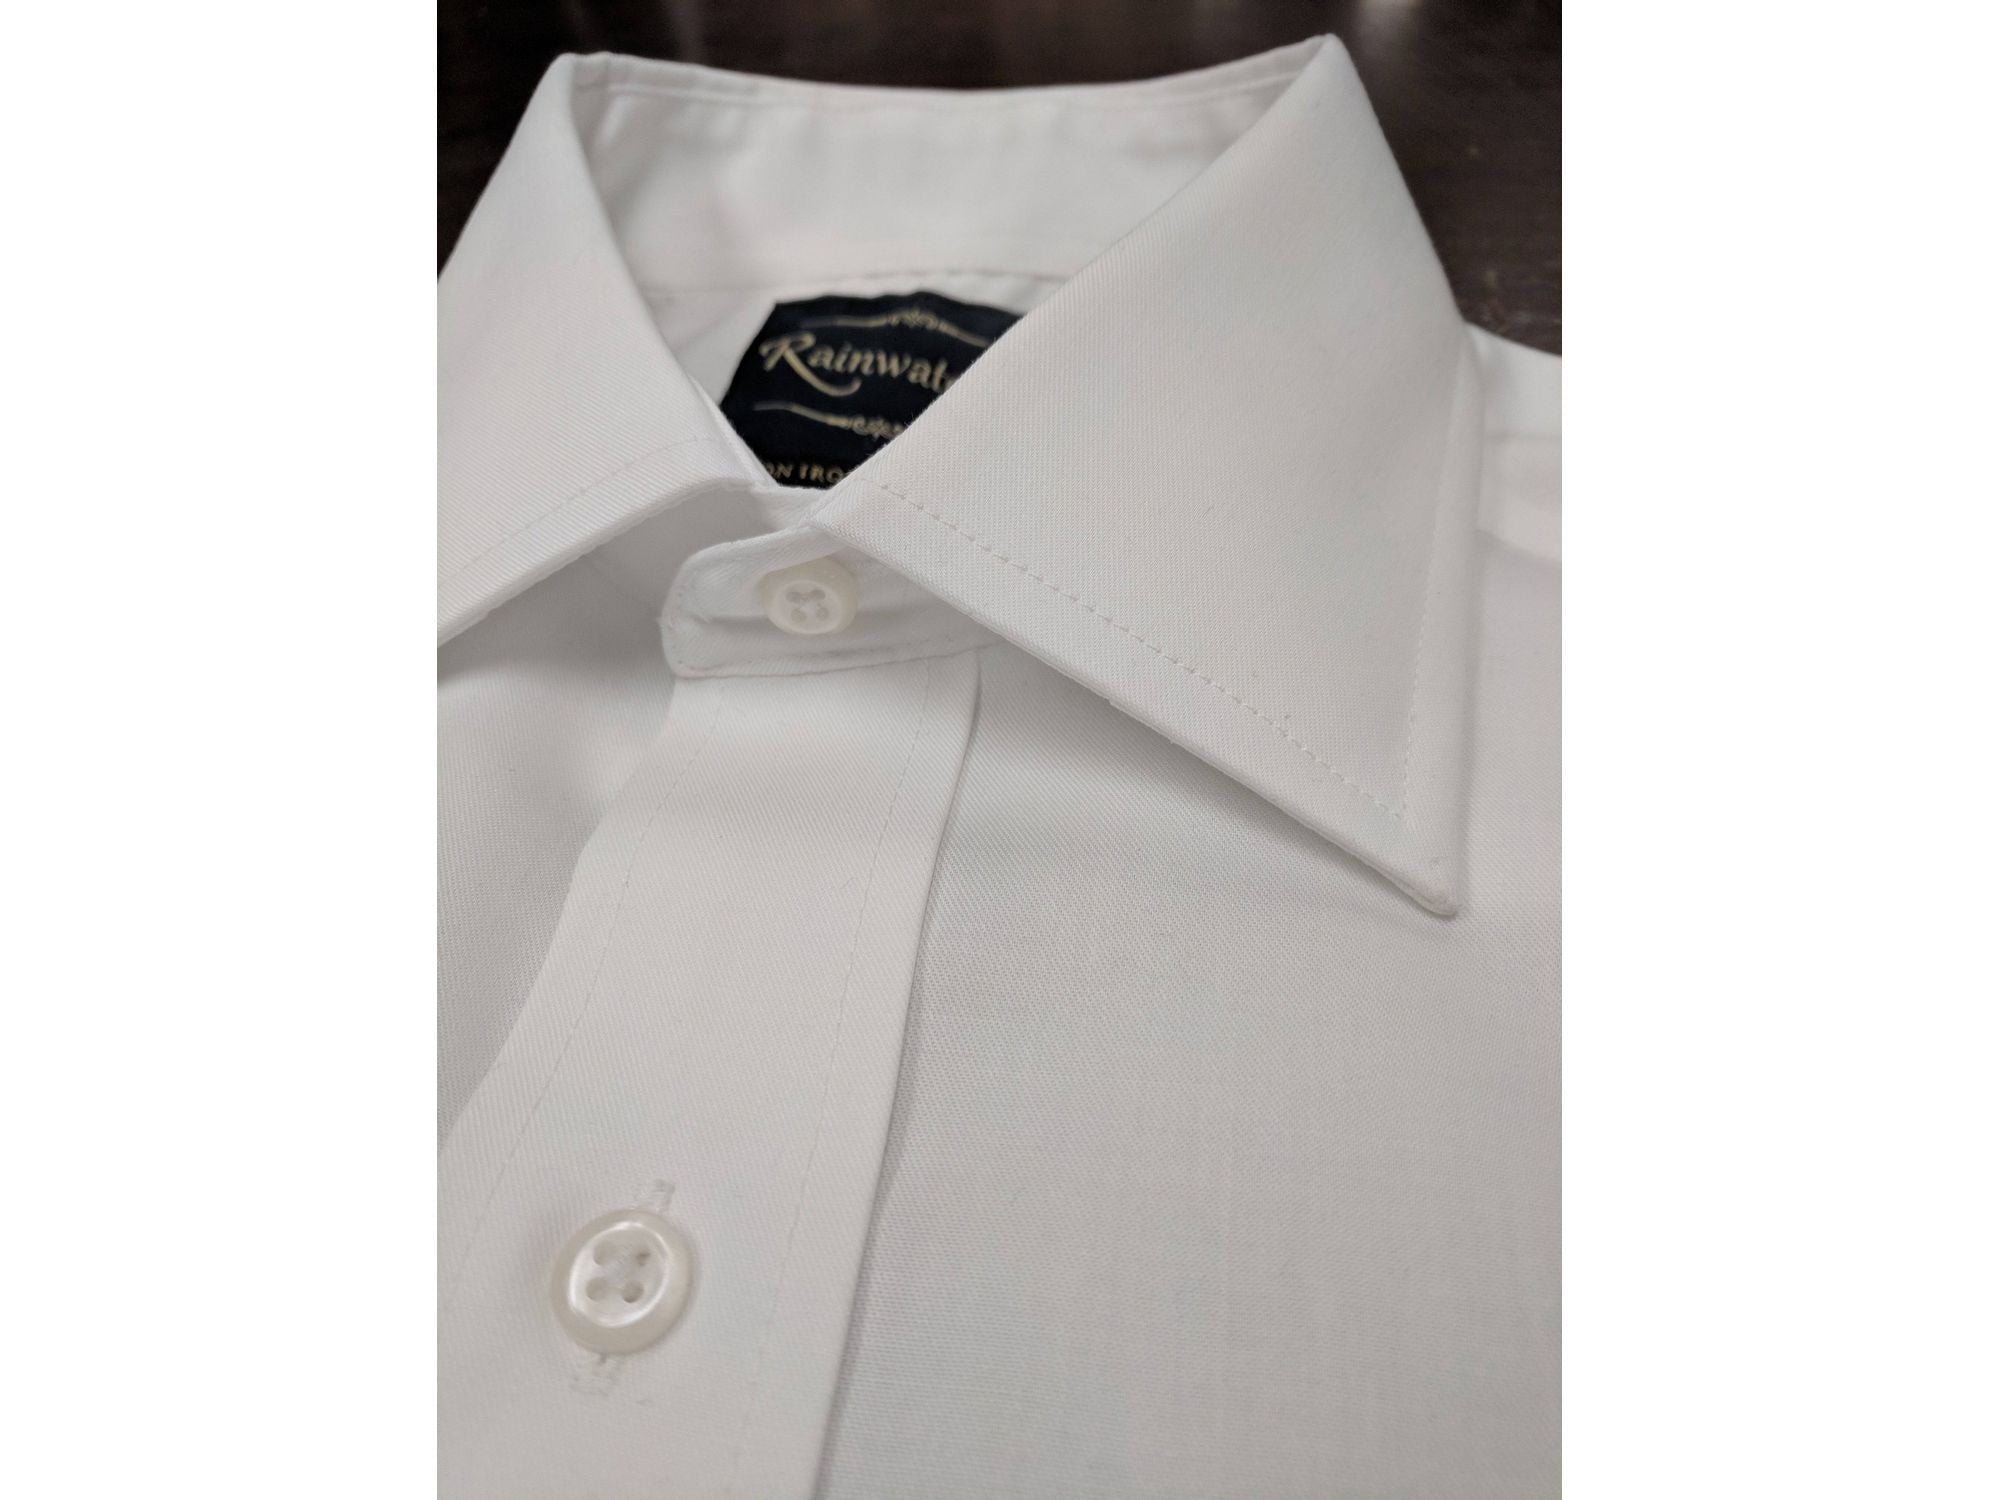 Rainwater's White 100% Cotton Wrinkle Free, Classic Fit, Button Cuffs - Dress Shirt - Rainwater's Men's Clothing and Tuxedo Rental